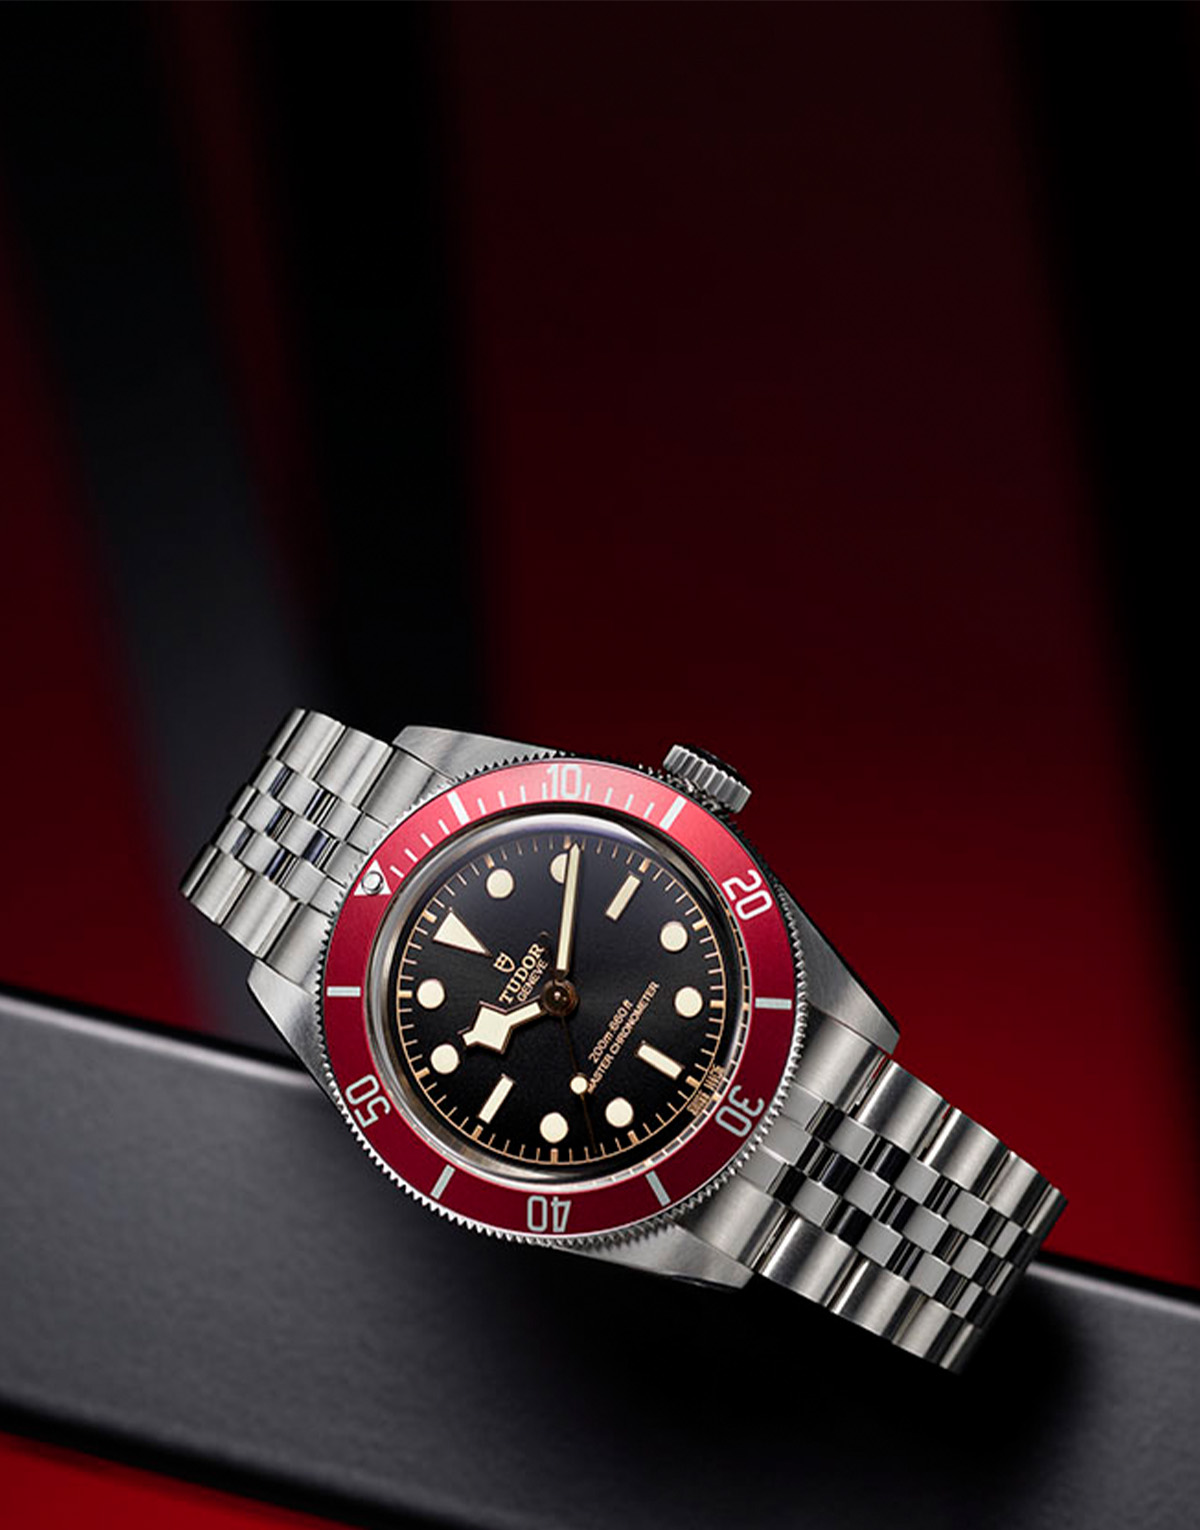 Tudor Black Bay Collection watch resting on a cloth